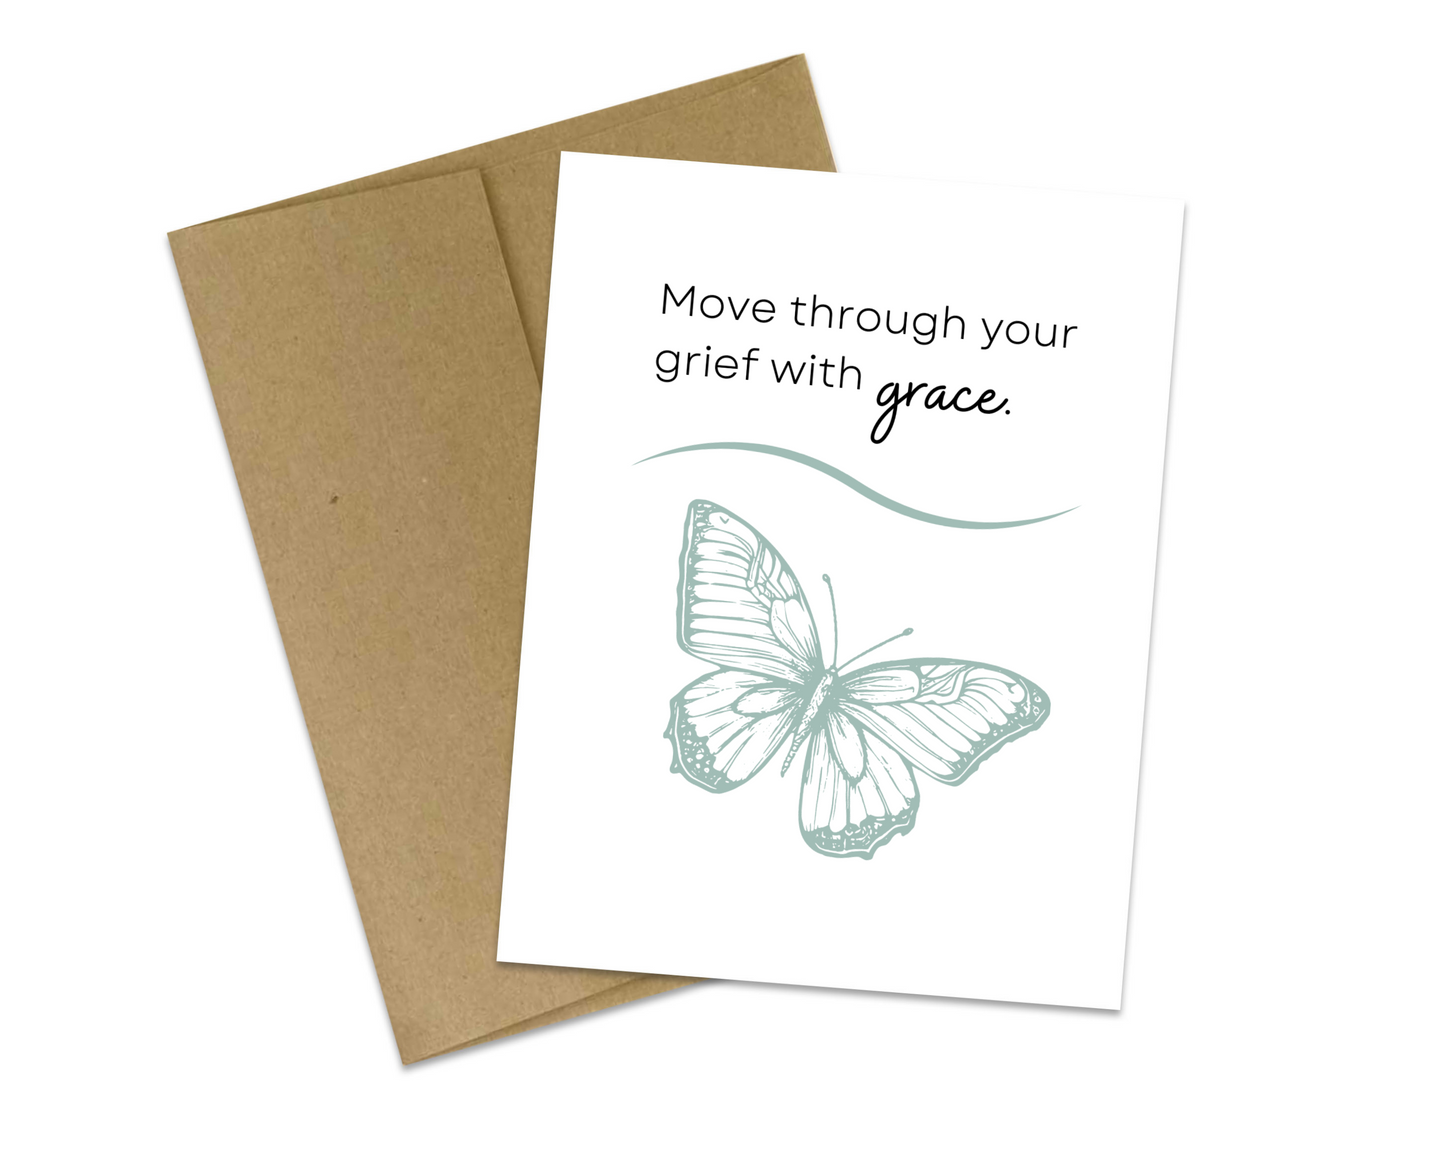 Move through your grief with grace